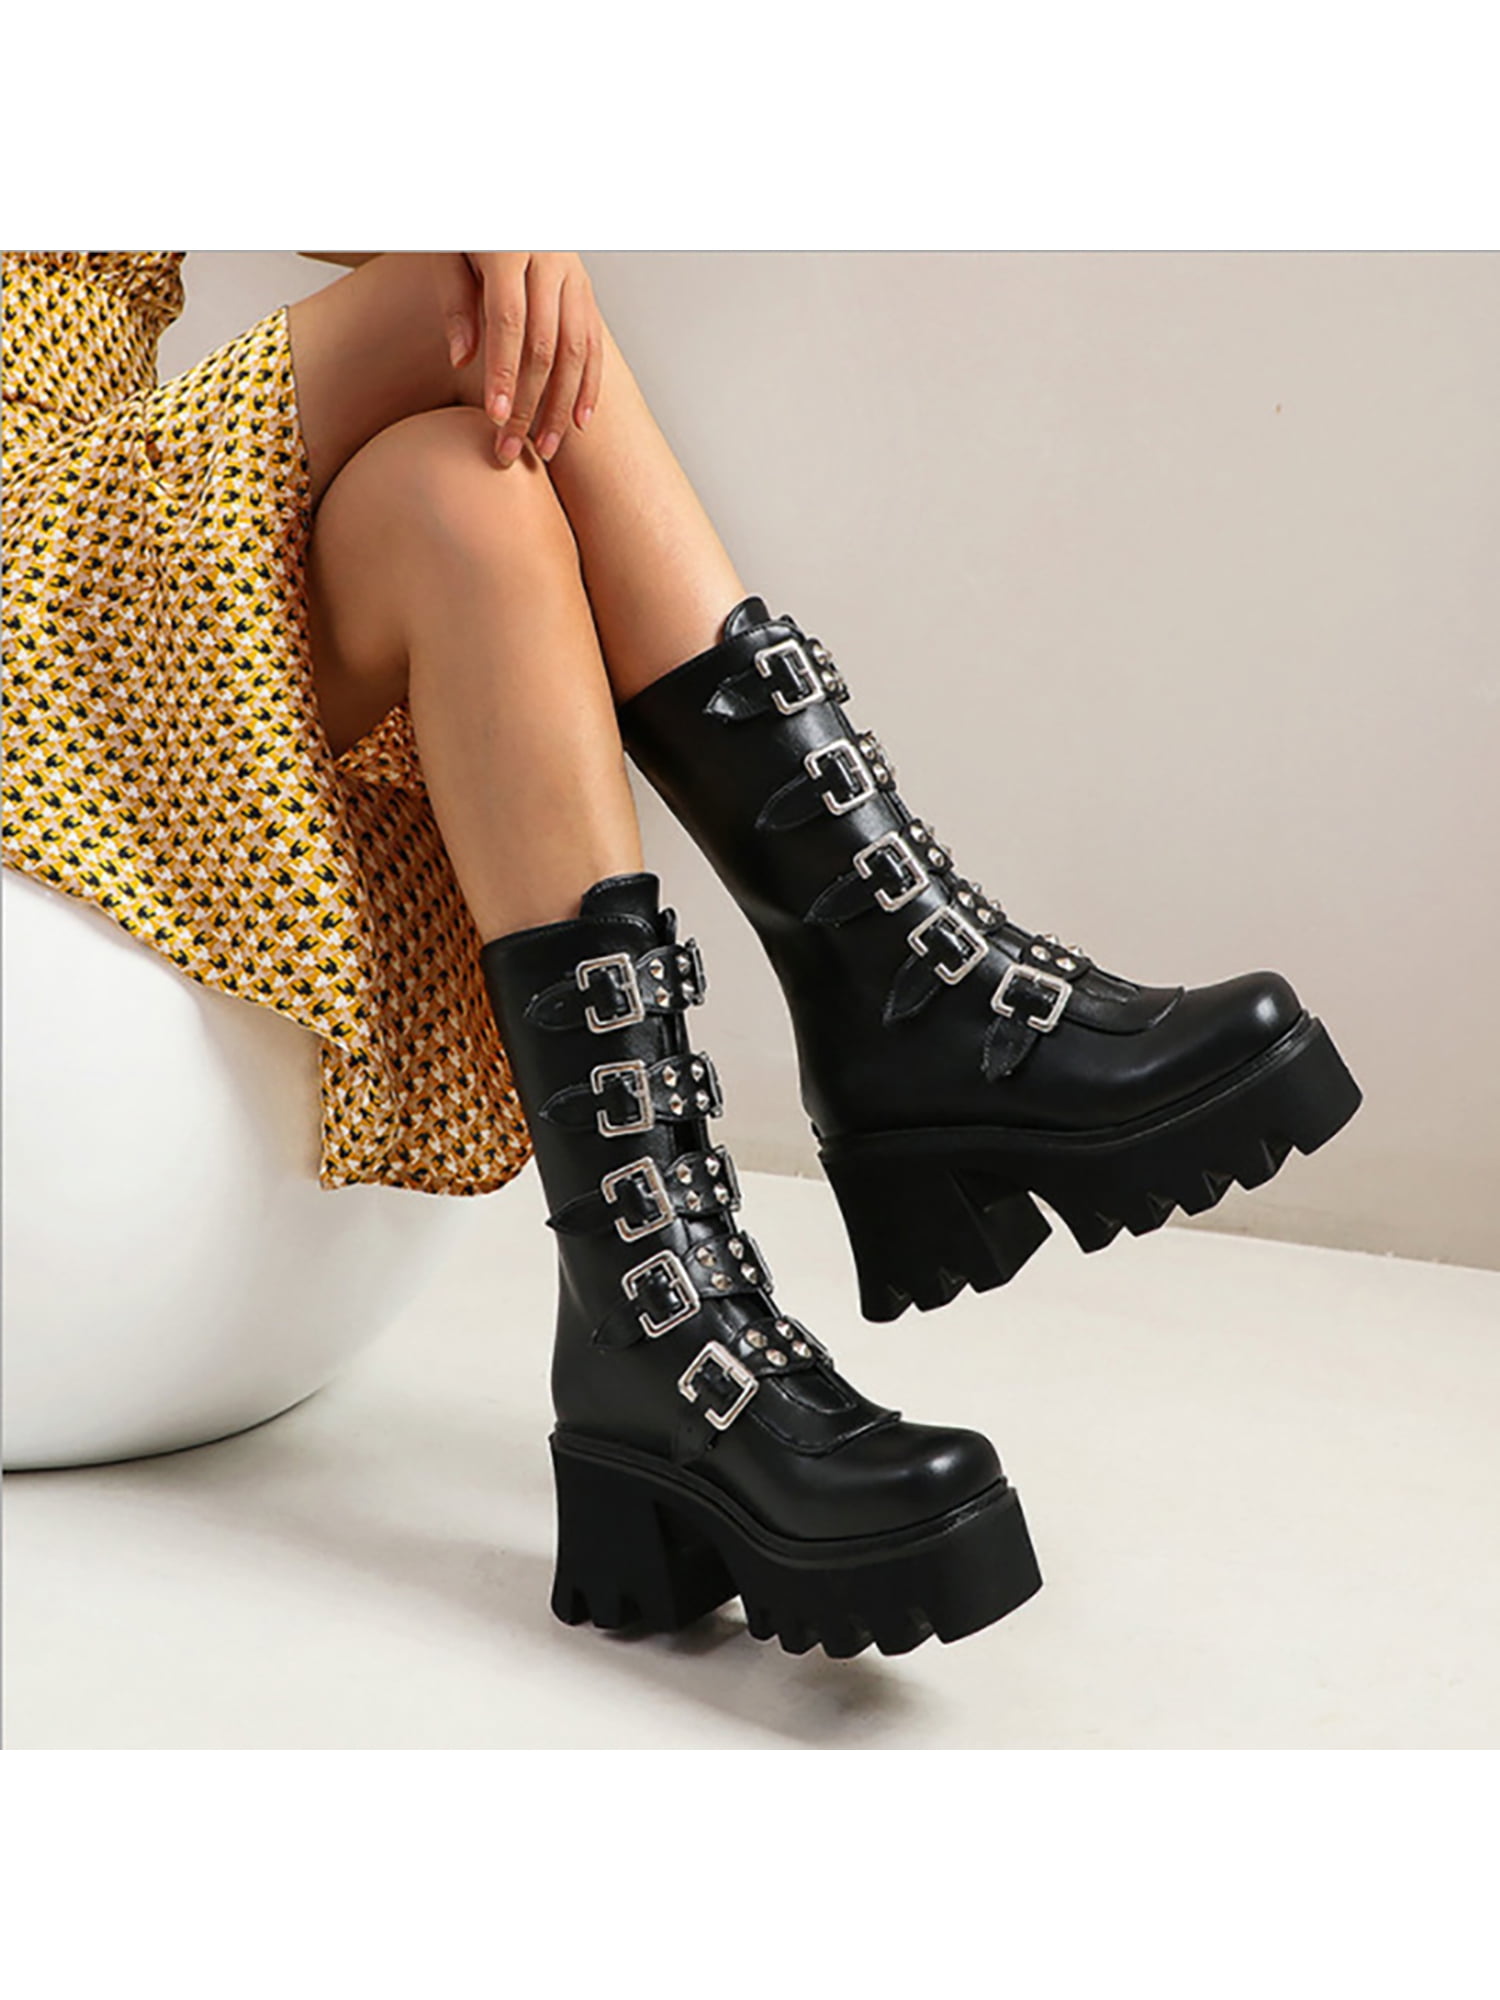 Fashion Women's Comfort Wedge Heels Shoes Lace Up Platform Goth Ankle Boots Size 